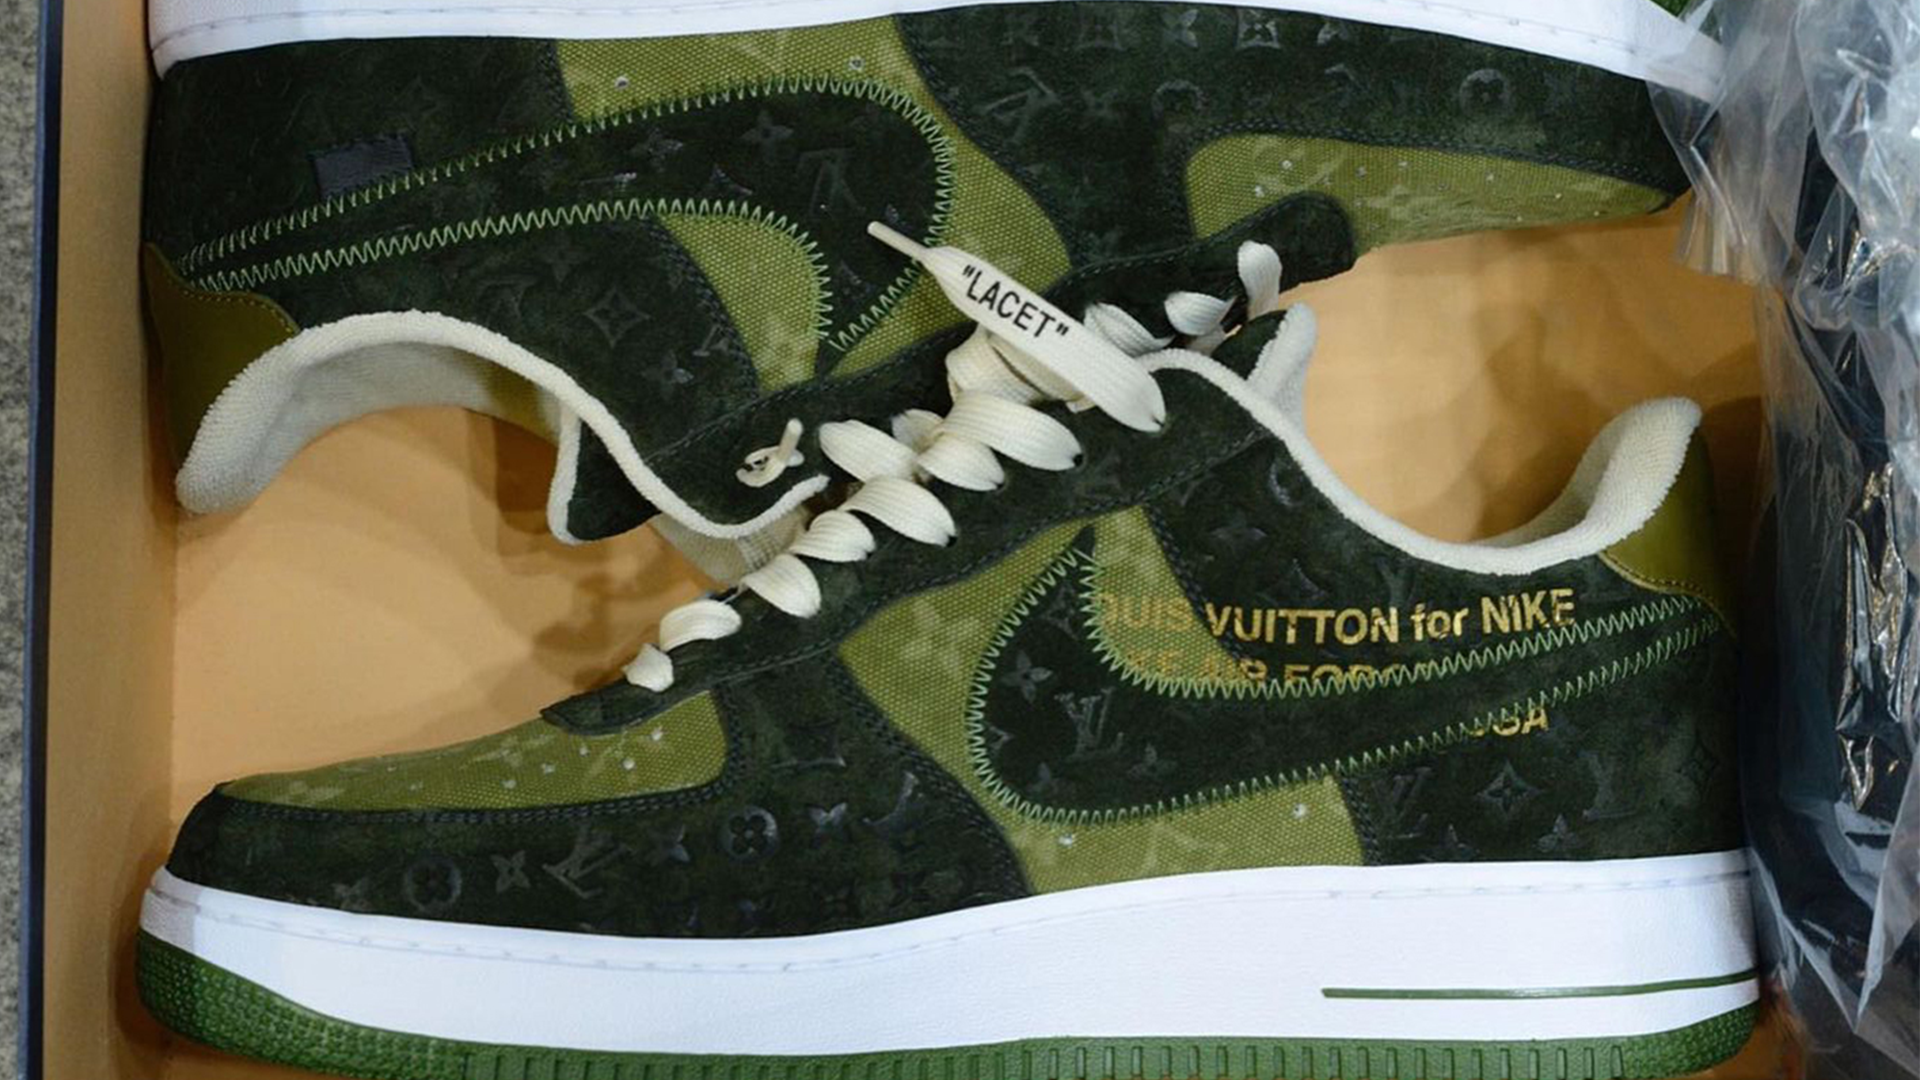 Images emerge of Louis Vuitton x Nike Air Force 1 collab